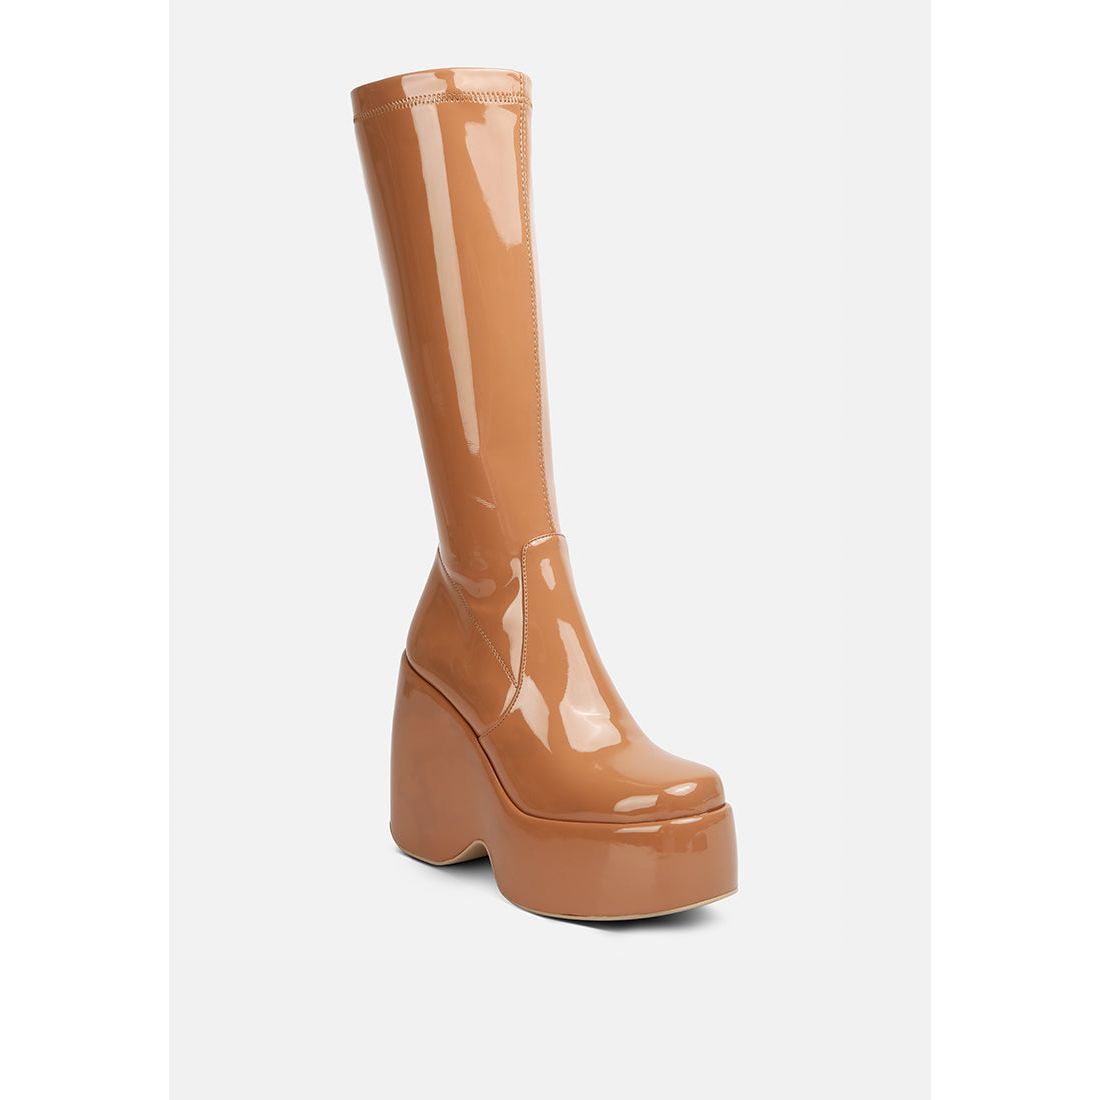 Dirty Dance Patent High Platform Calf Boots - KME means the very best